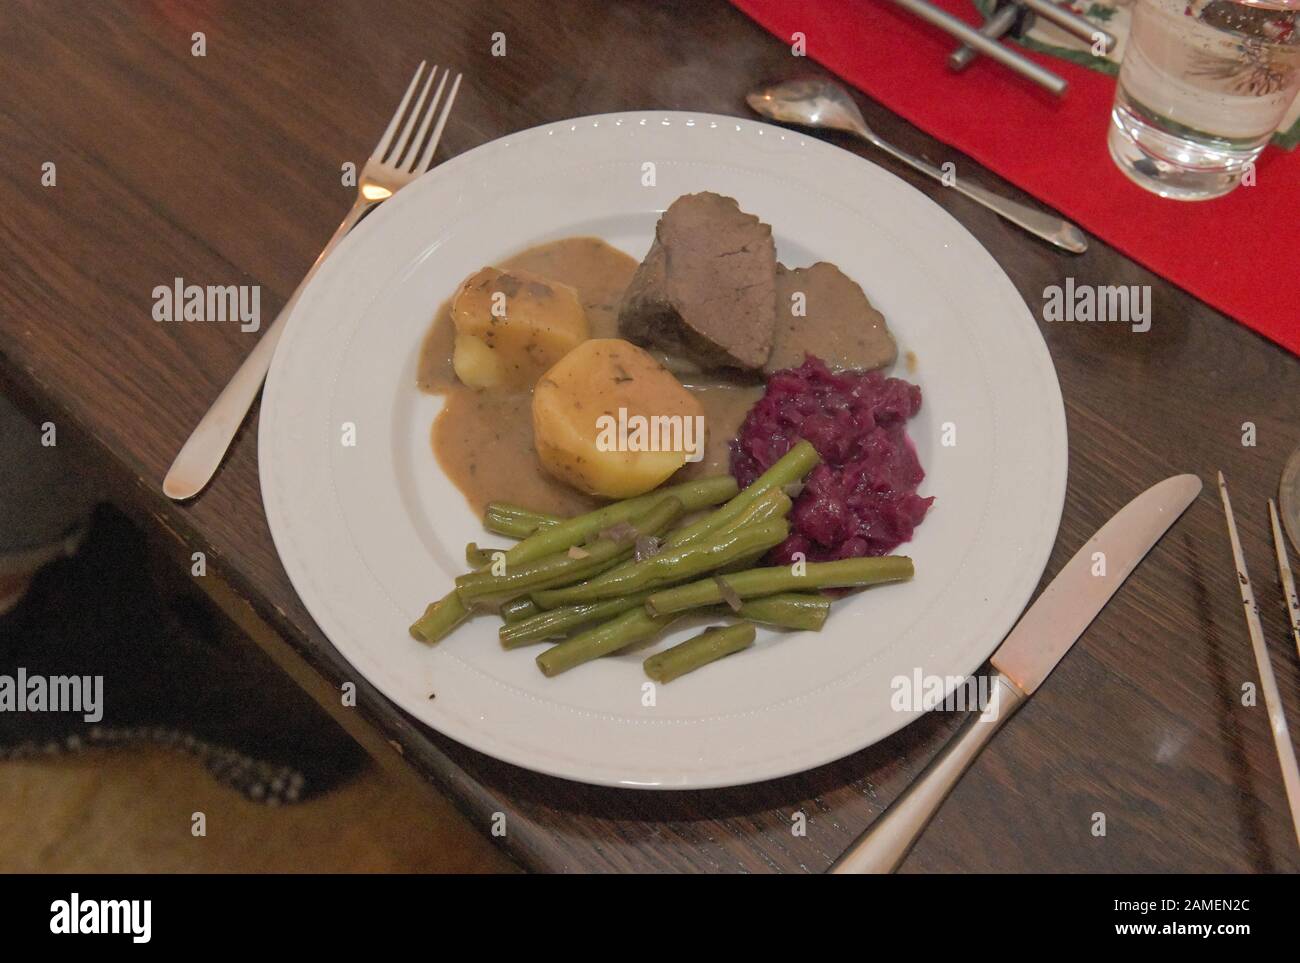 Hirschbraten High Resolution Stock Photography and Images - Alamy